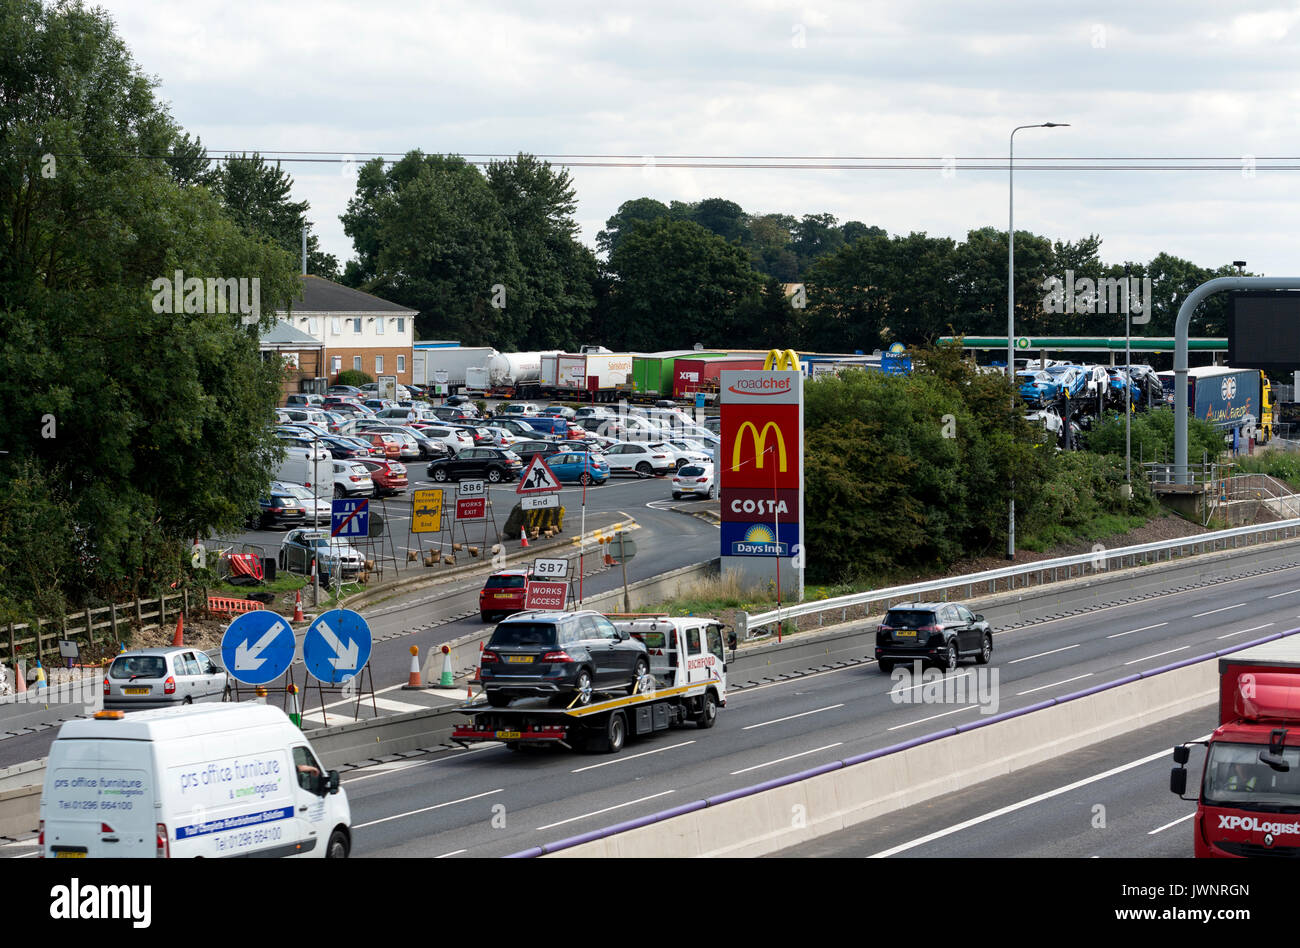 Service Station Uk High Resolution Stock Photography and Images - Alamy